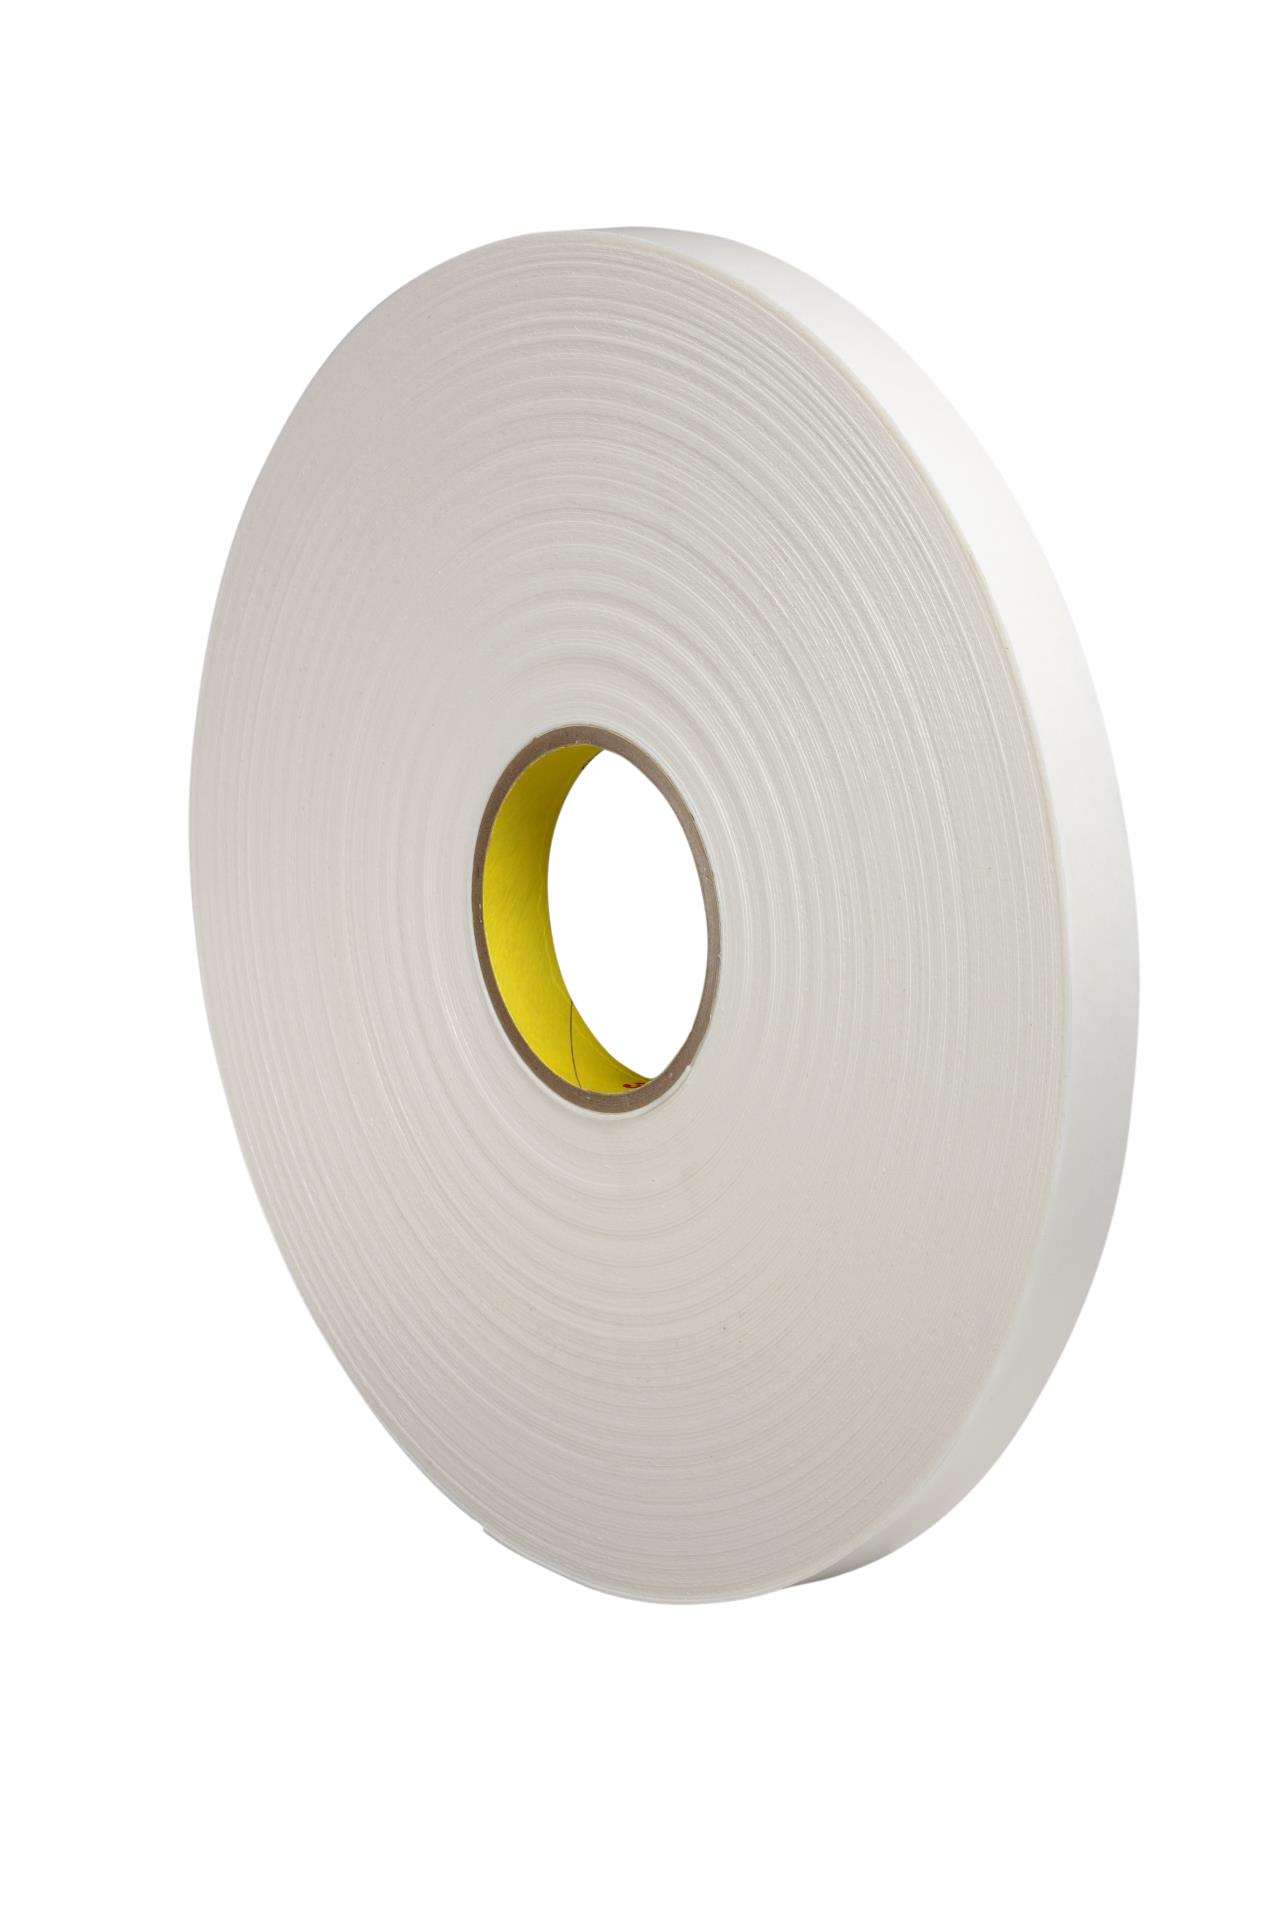 Strong Adhesive 15cm X 5cm Glow in dark Tape 1x Strips 